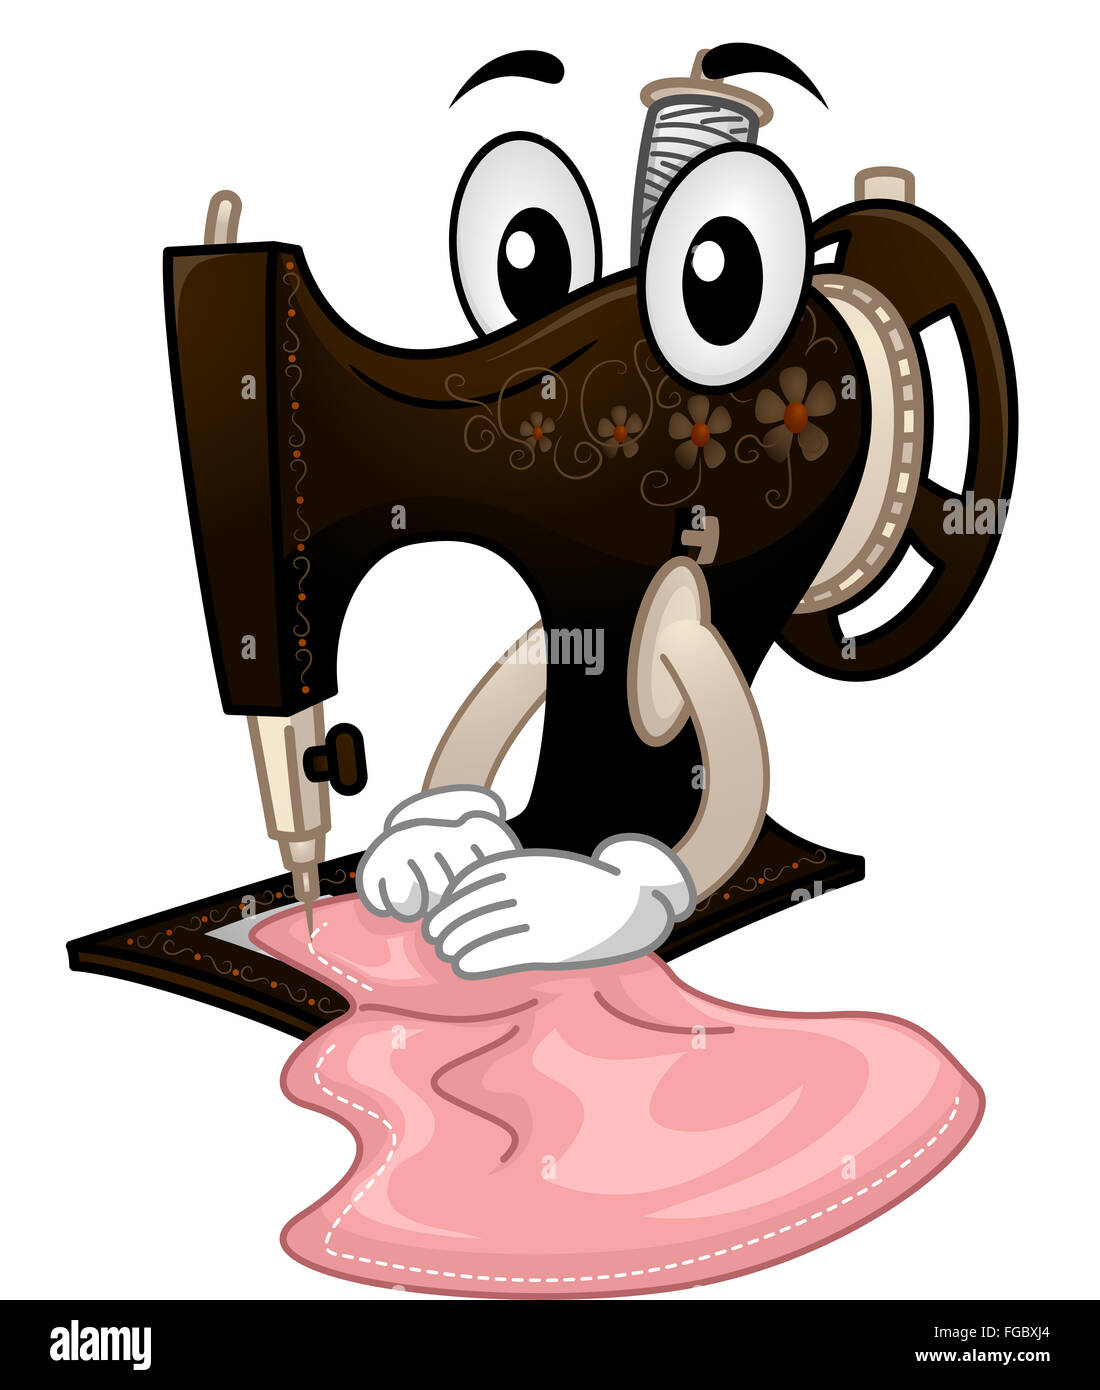 Mascot Illustration of a Vintage Sewing Machine Working on a Piece of Fabric Stock Photo